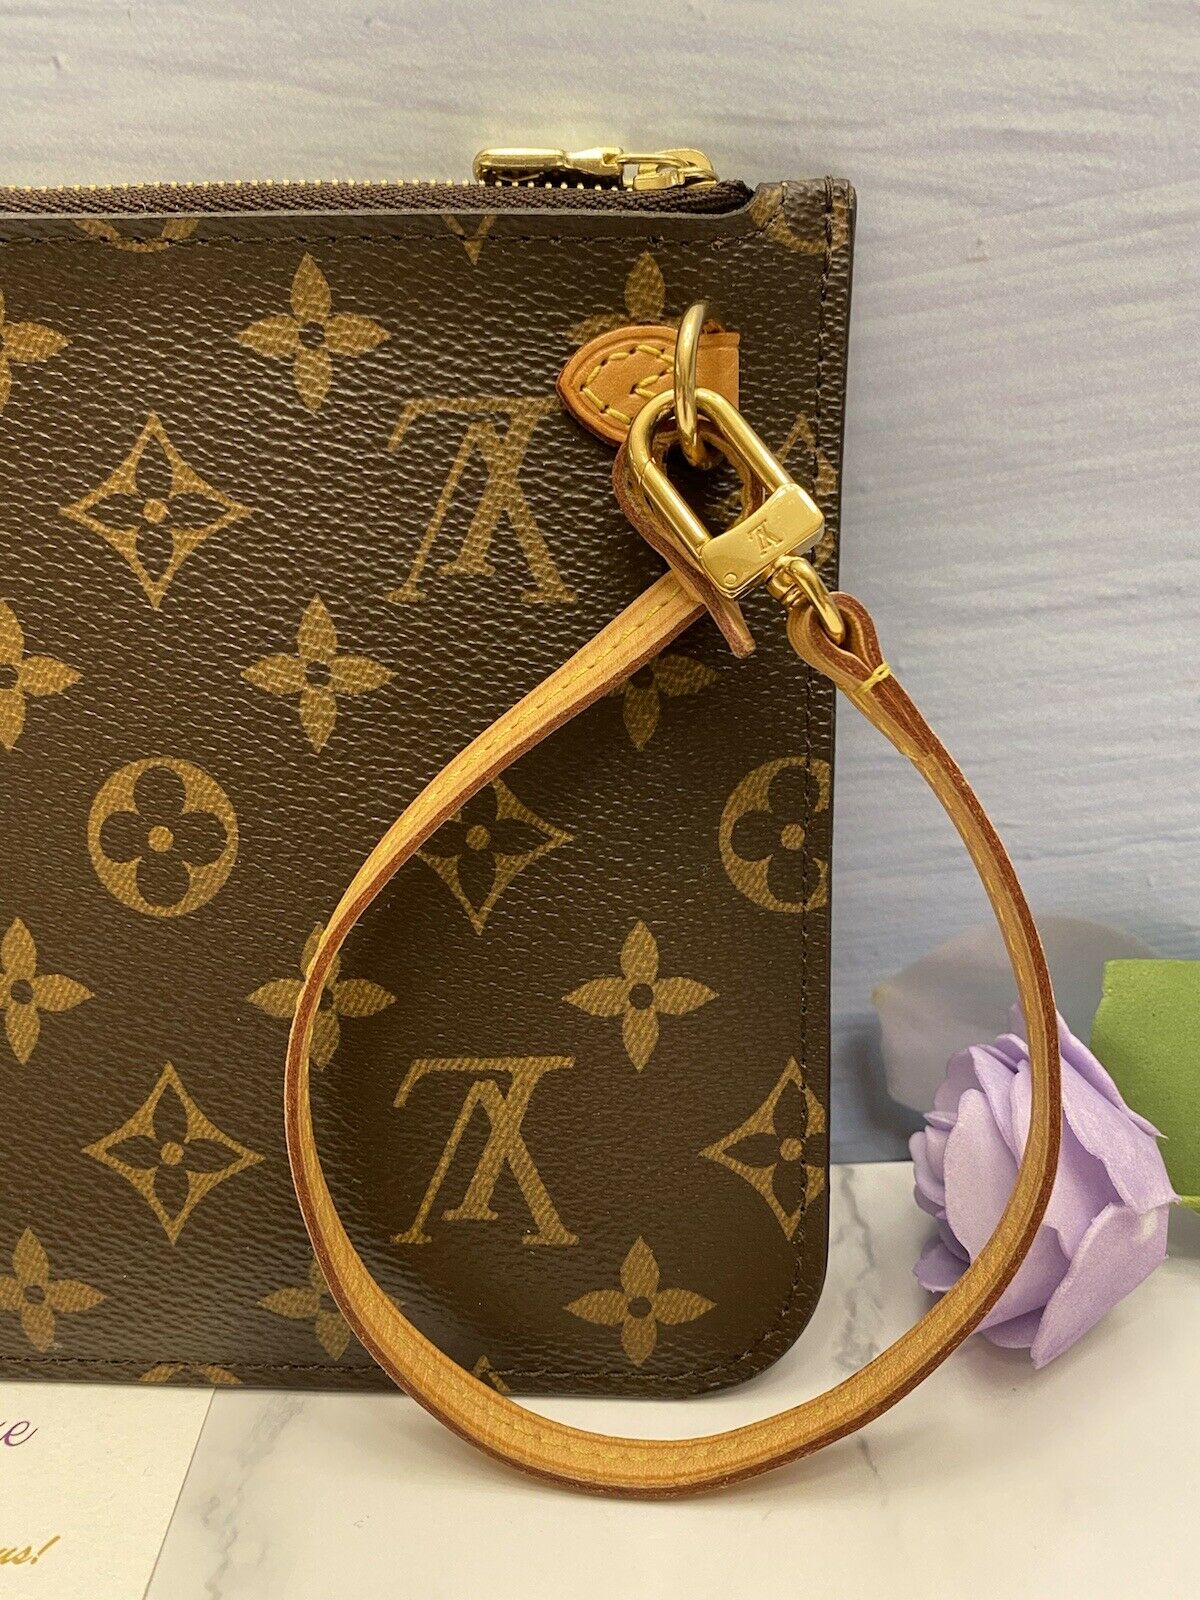 Neverfull MM/GM Beige Monogram Wristlet/Pouch/Clutch (SD3195) – AE Deluxe  LLC®